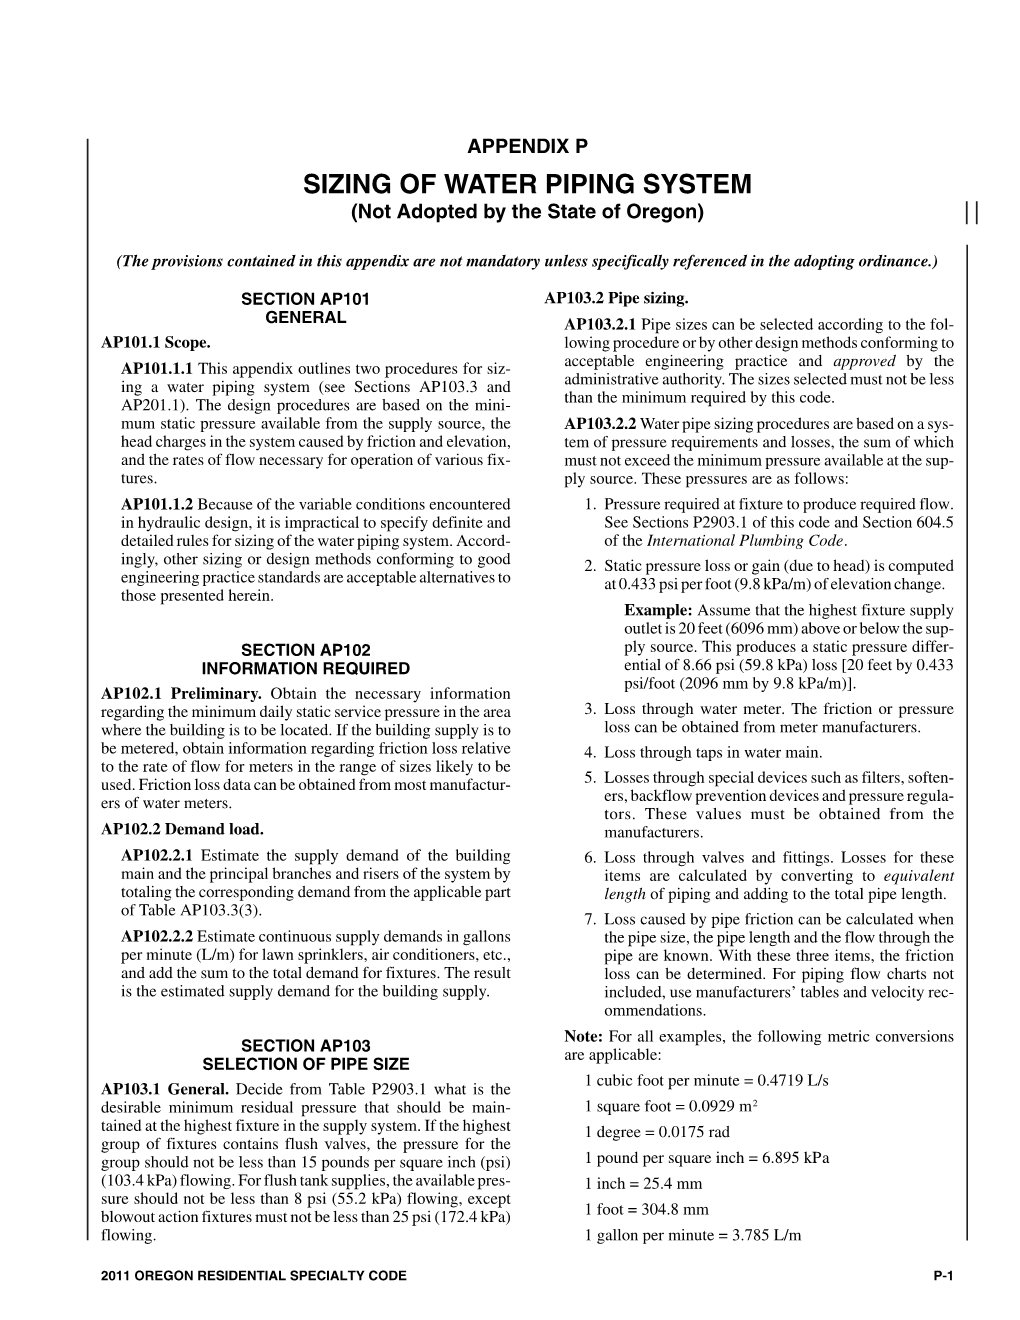 APPENDIX P SIZING of WATER PIPING SYSTEM (Not Adopted by the State of Oregon)